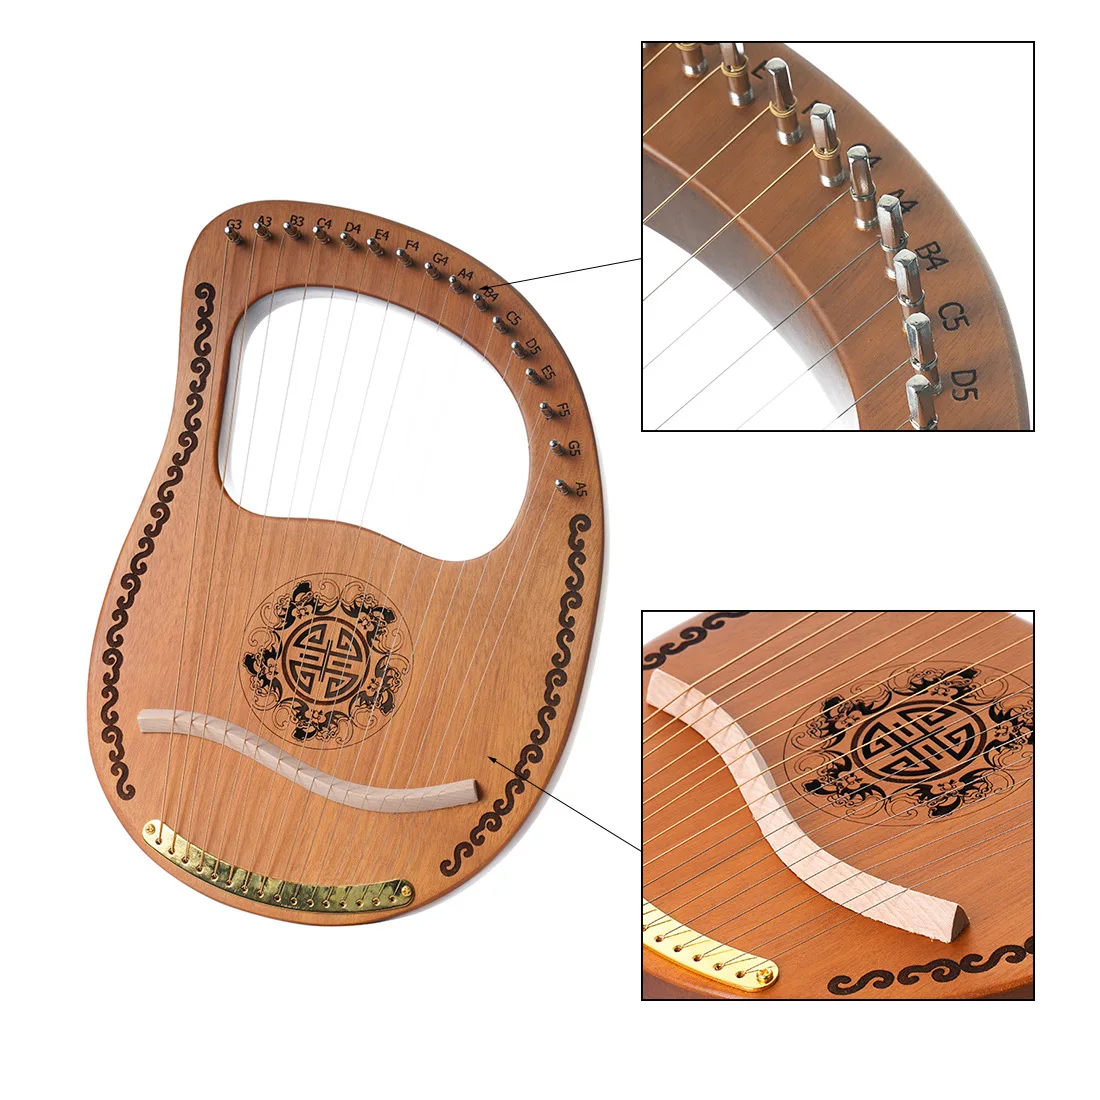 Lyre Harp 16 Strings Piano Harp Lyre Harp Wooden Mahogany Musical Instrument Lyre Harp with Tuning Wrench Spare Strings enlarge